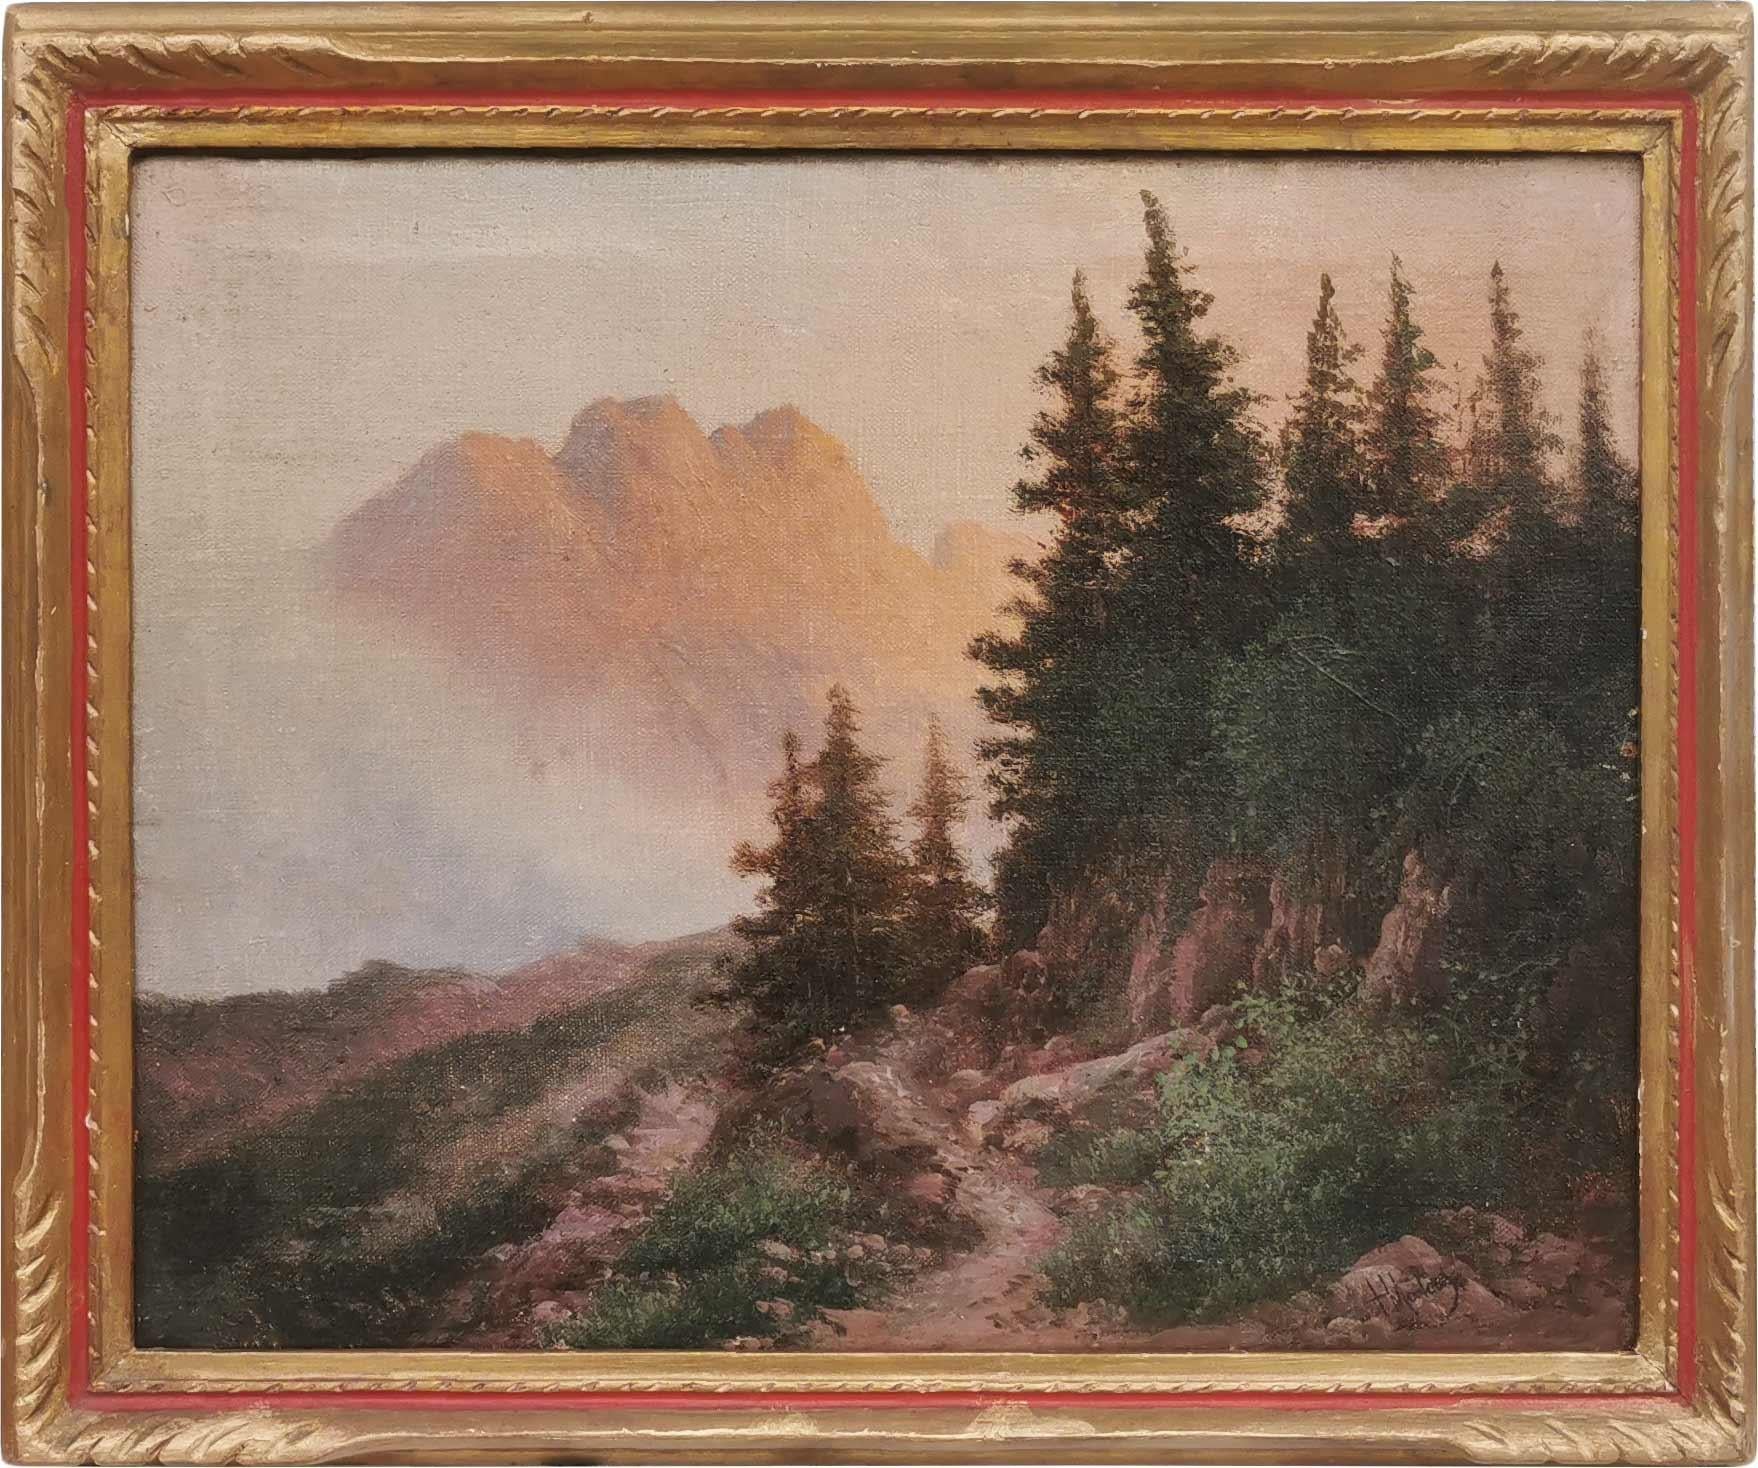 pair of mountain landscape paintings by Henry Marko - 1890 For Sale 10